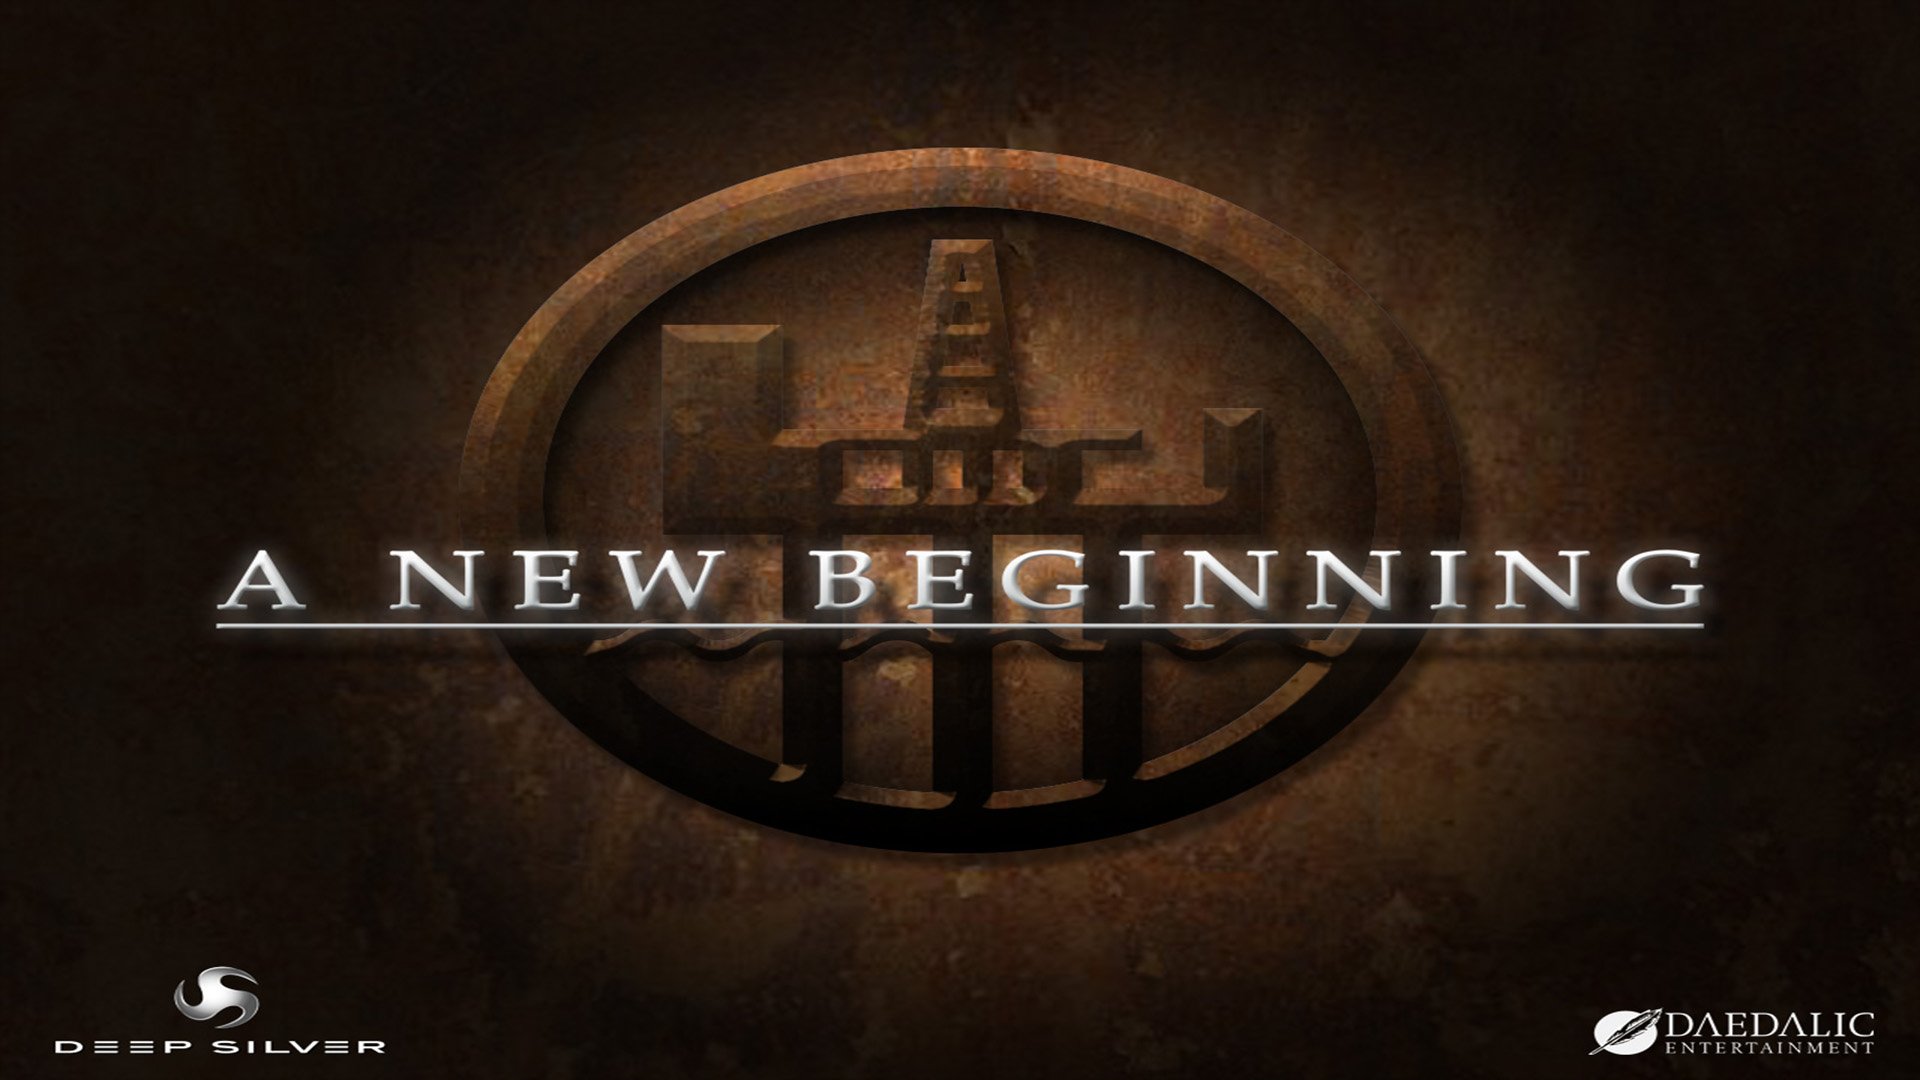 New beginning HD wallpapers  tag  Wallpaper Flare